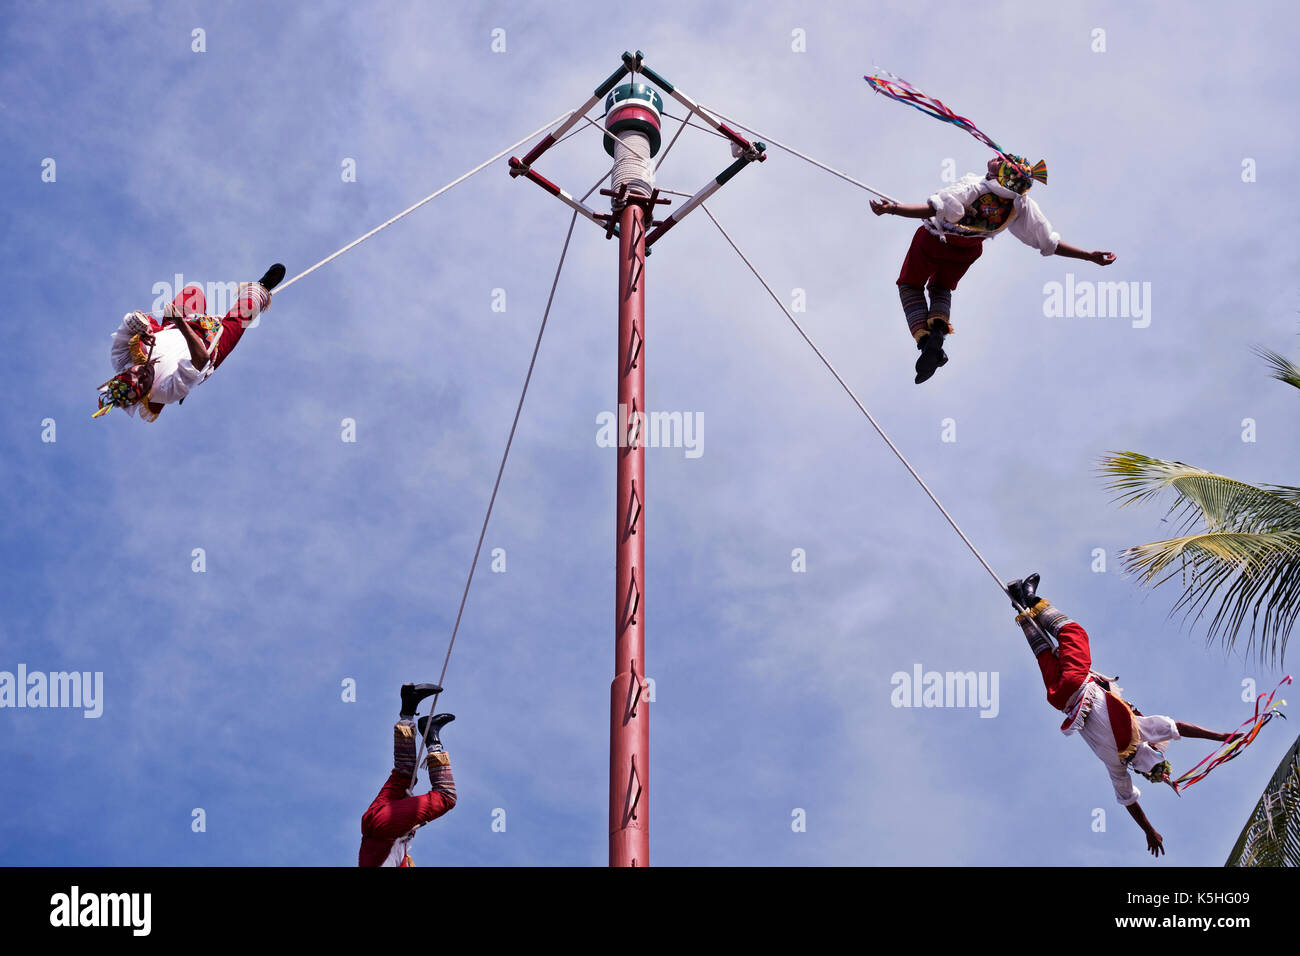 The Danza de los Voladores (Dance of the Flyers), or Palo Volador (pole flying), is an ancient Mesoamerican ceremony/ritual still performed today in M Stock Photo